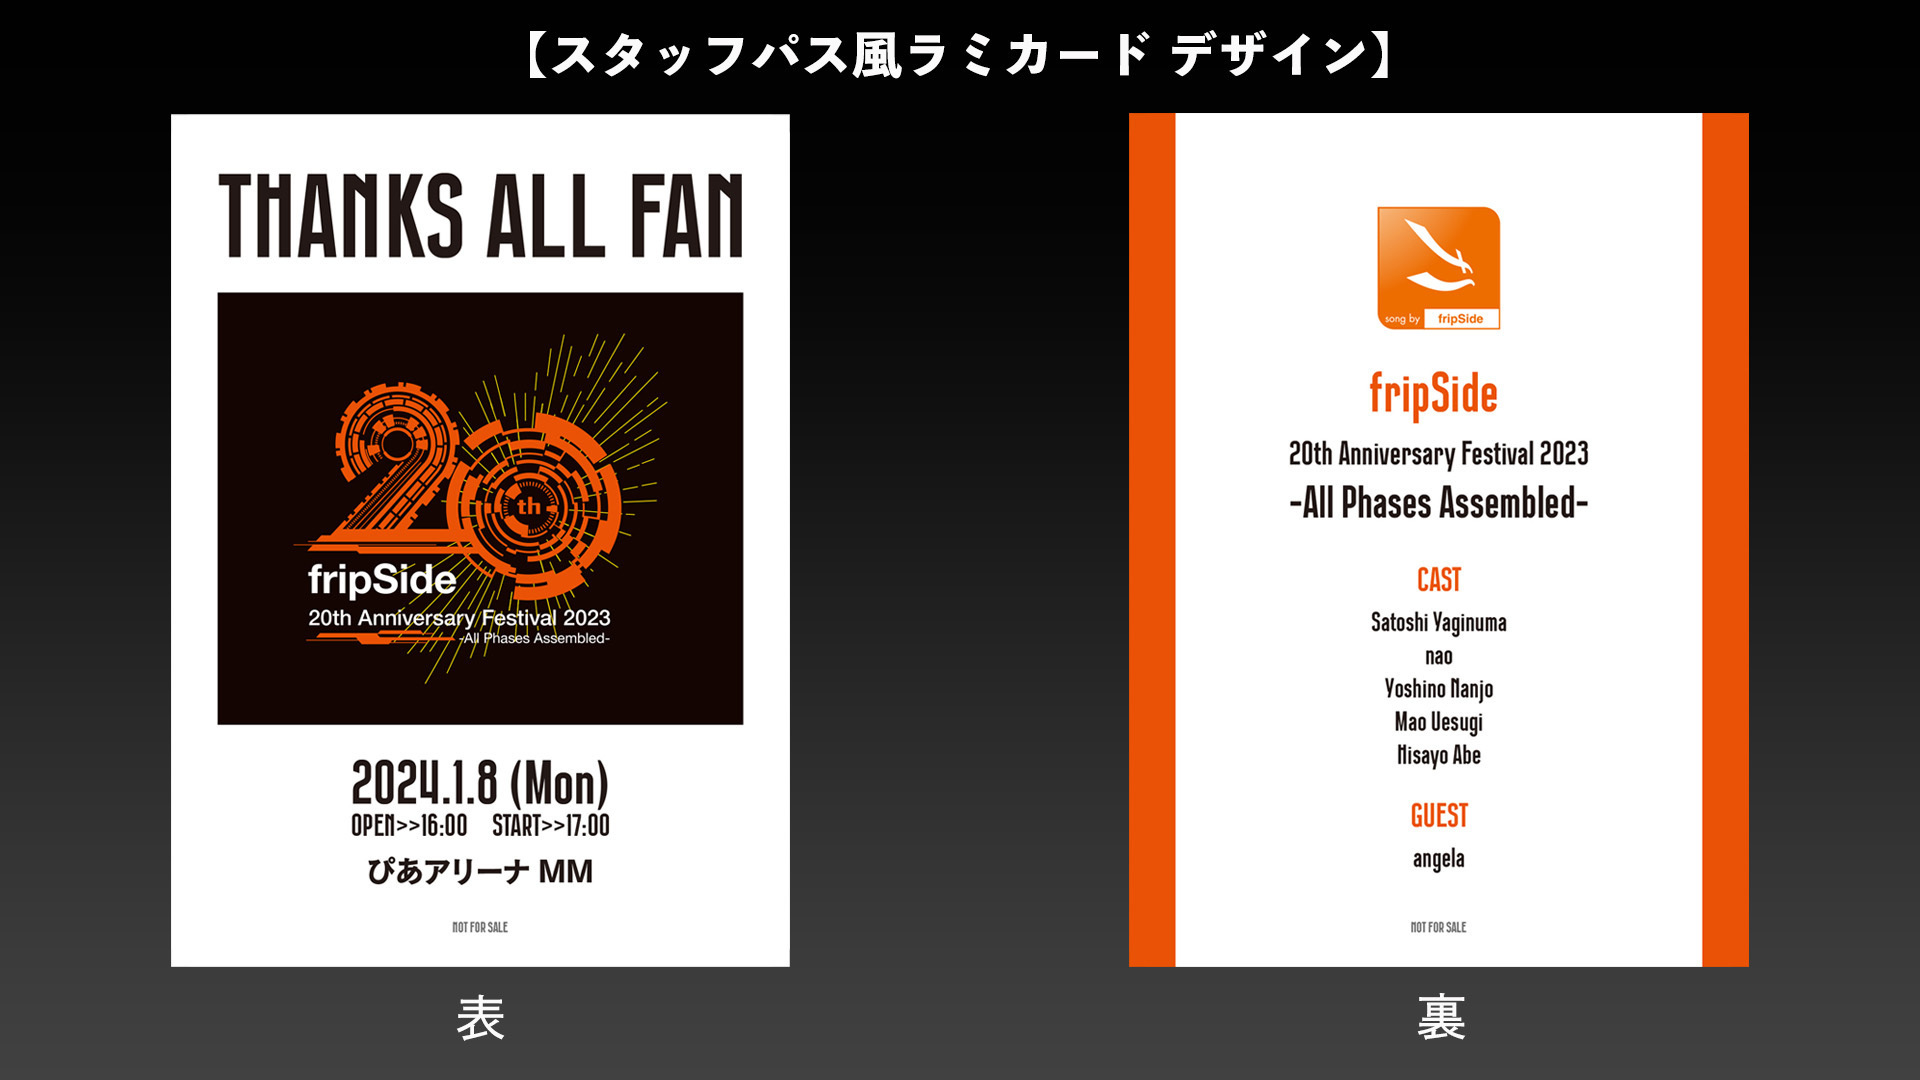 fripSide 20th Anniversary Festival 2023 -All Phases Assembled 